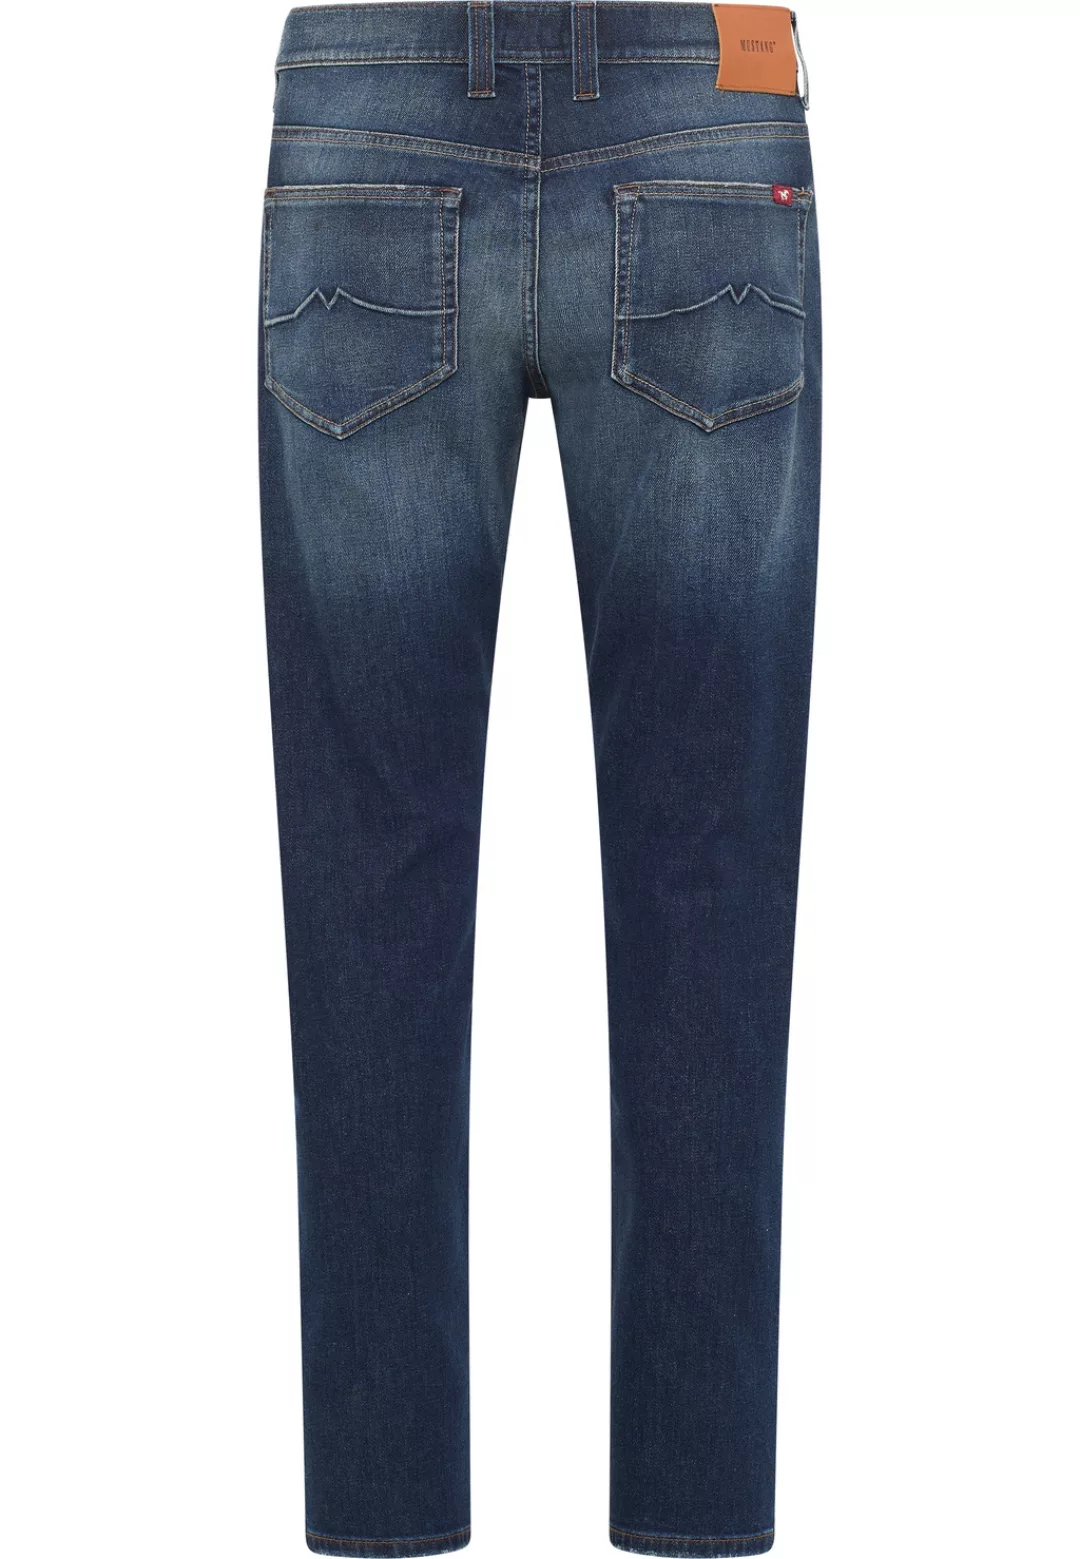 MUSTANG Tapered-fit-Jeans Style Toledo Tapered günstig online kaufen